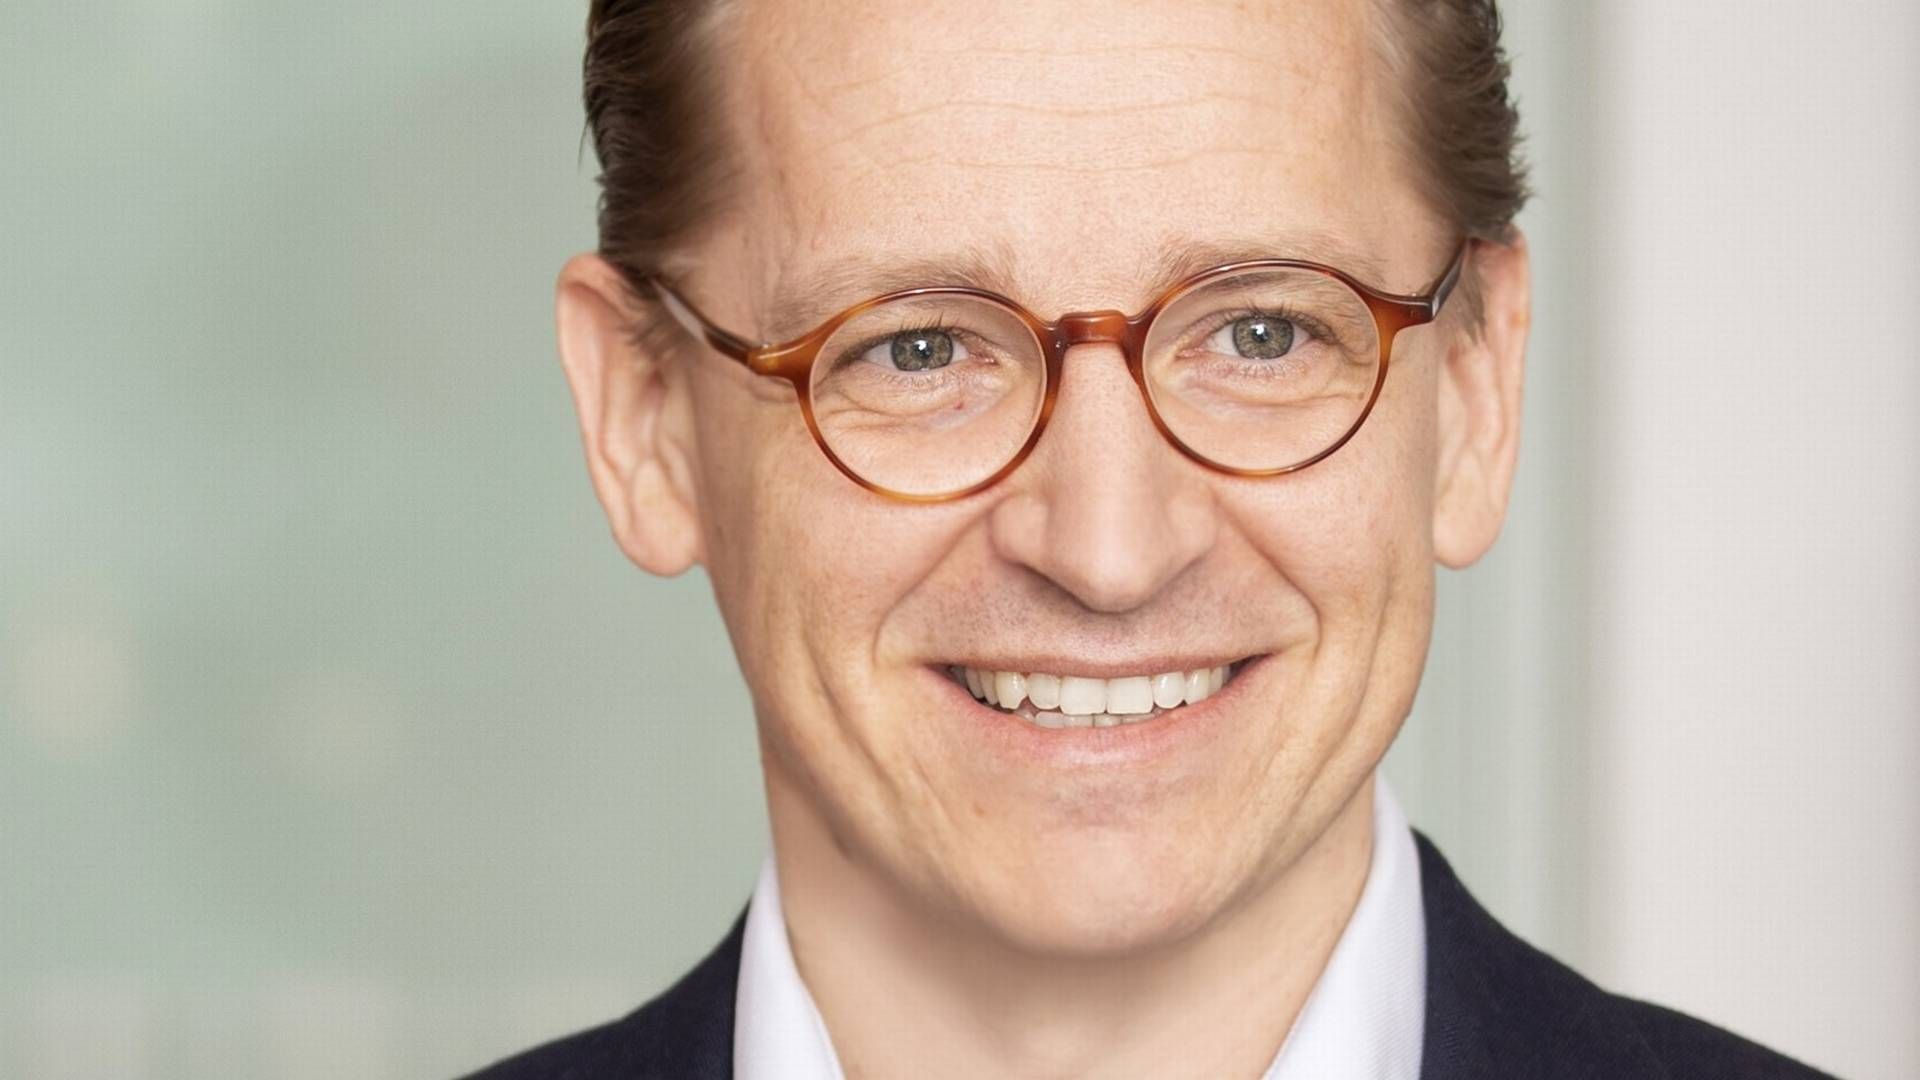 "We made a strategic decision last year. We wanted to gain control of the companies. They are important to us and they have an interesting future," says Christian Rychly, managing director - shipping, MPC Capital, about the merger of Harper Petersen and Albis Shipping & Transport. | Photo: MPC Capital